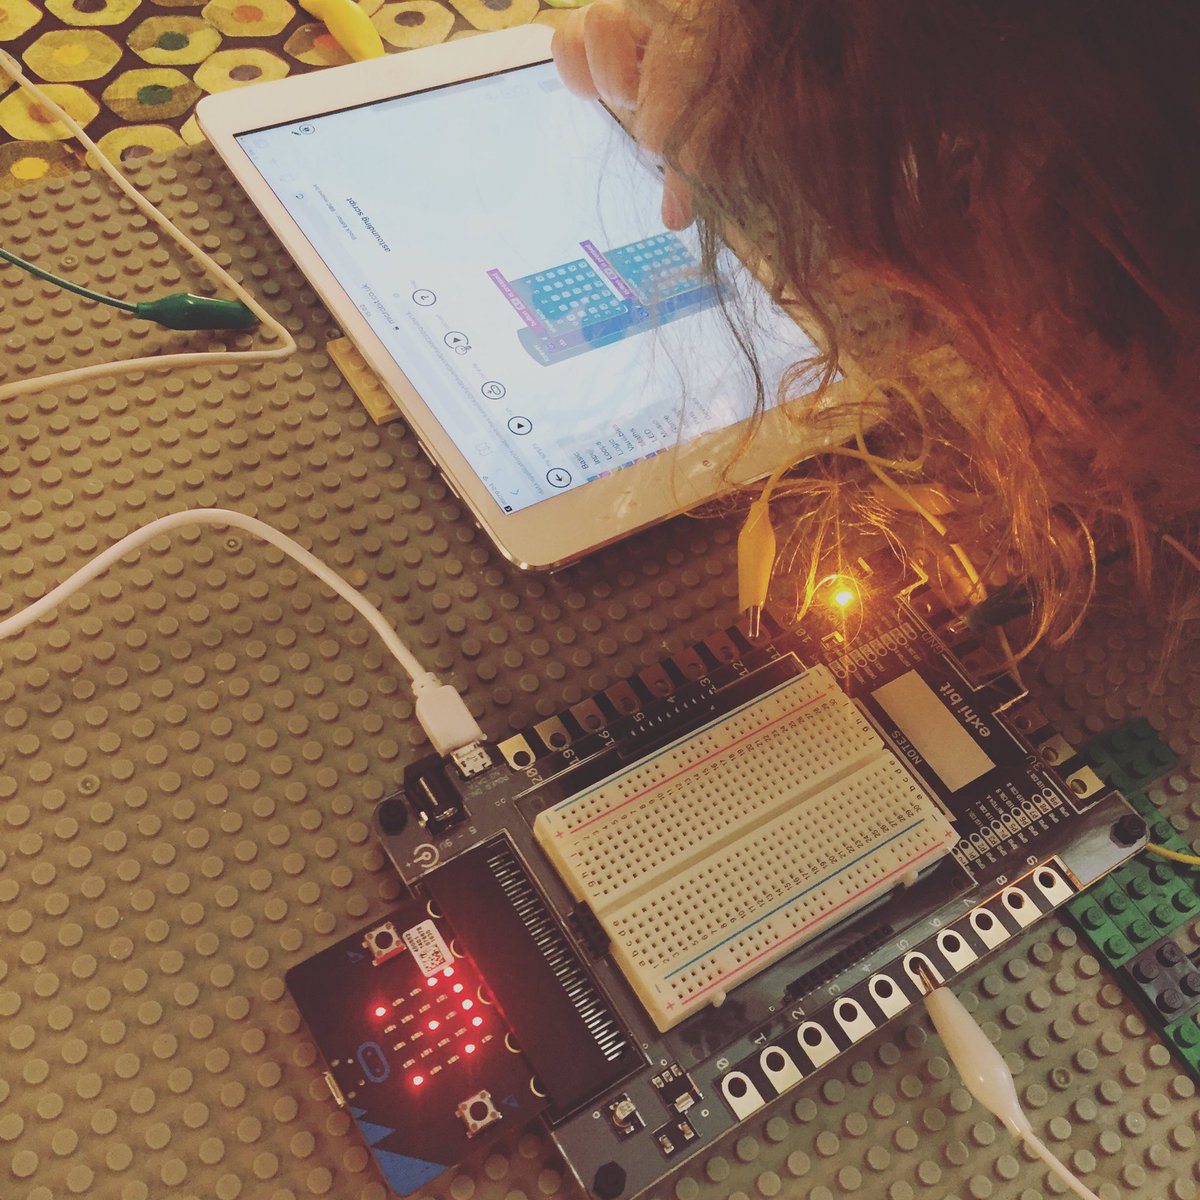 Such an epic moment. A five year old using an iPad to program the lights on a #bbcmicrobit using simple blockcode #superprouddad #kidmakers